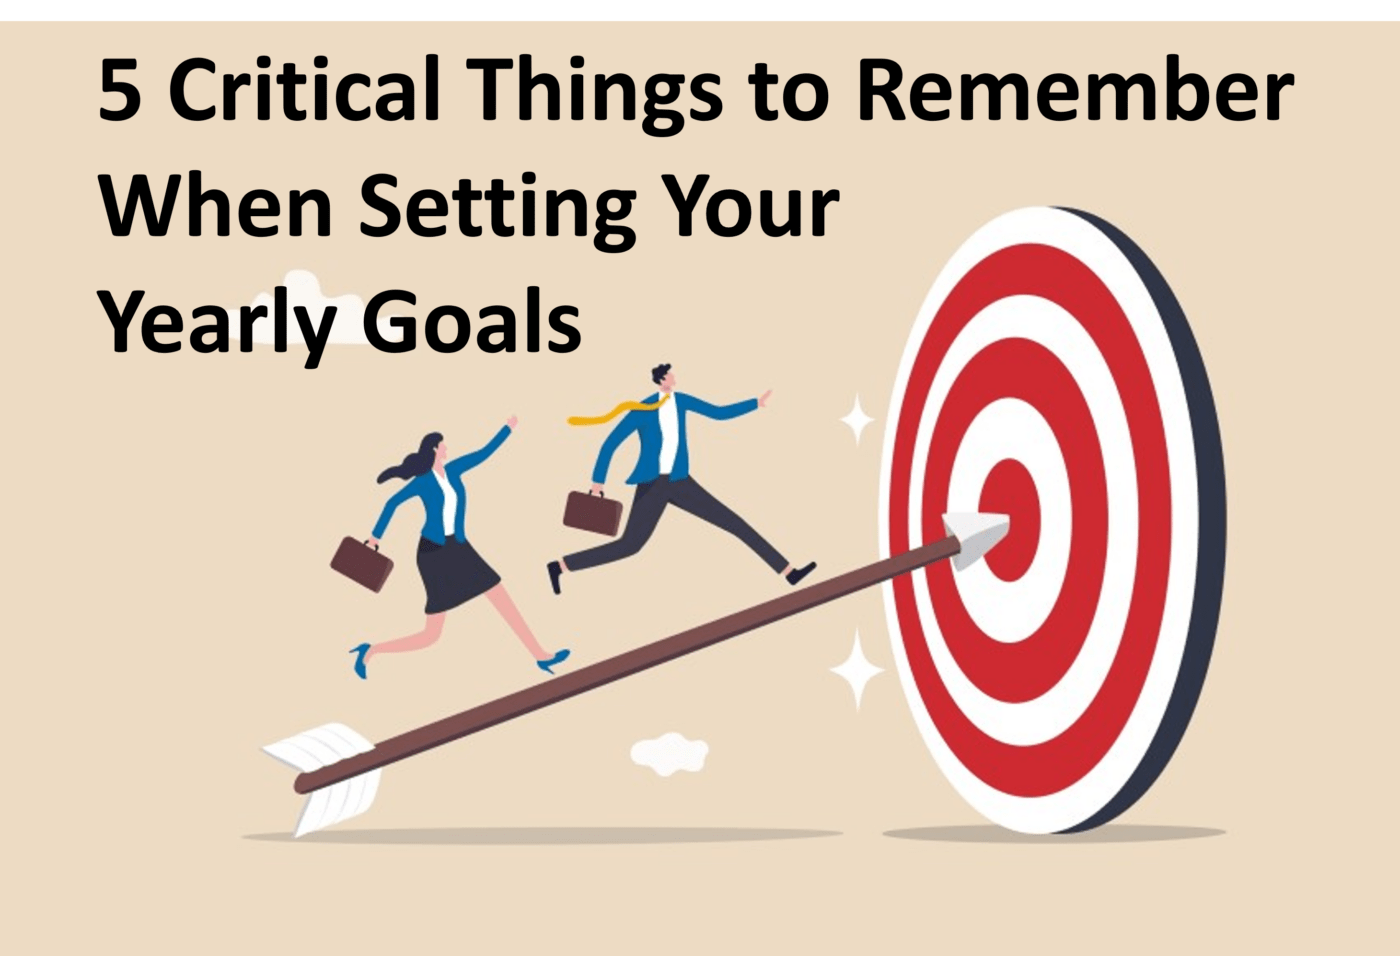 Unlock Your Potential: The Art of Crafting Meaningful Growth Goals - image 5-critical-things-goal-setting-1400x956 on http://cavemaninasuit.com